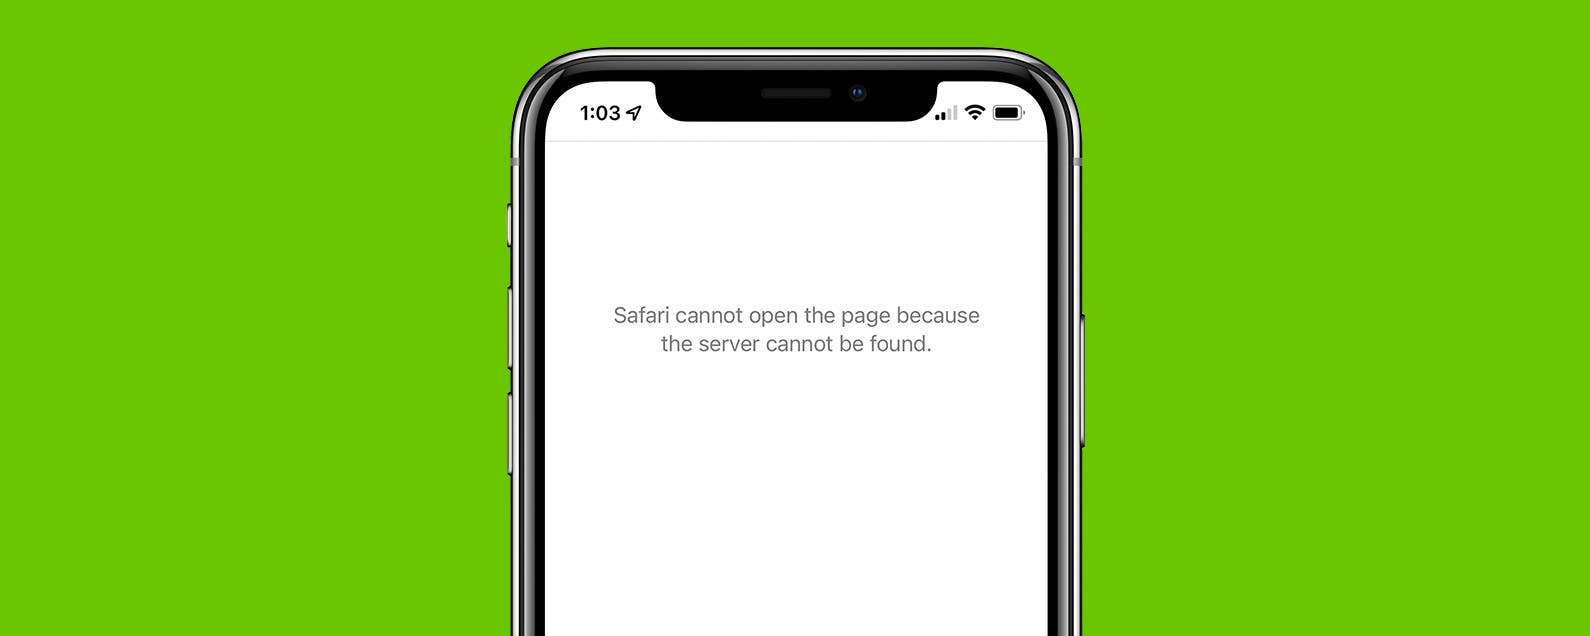 safari cannot open page because server not found